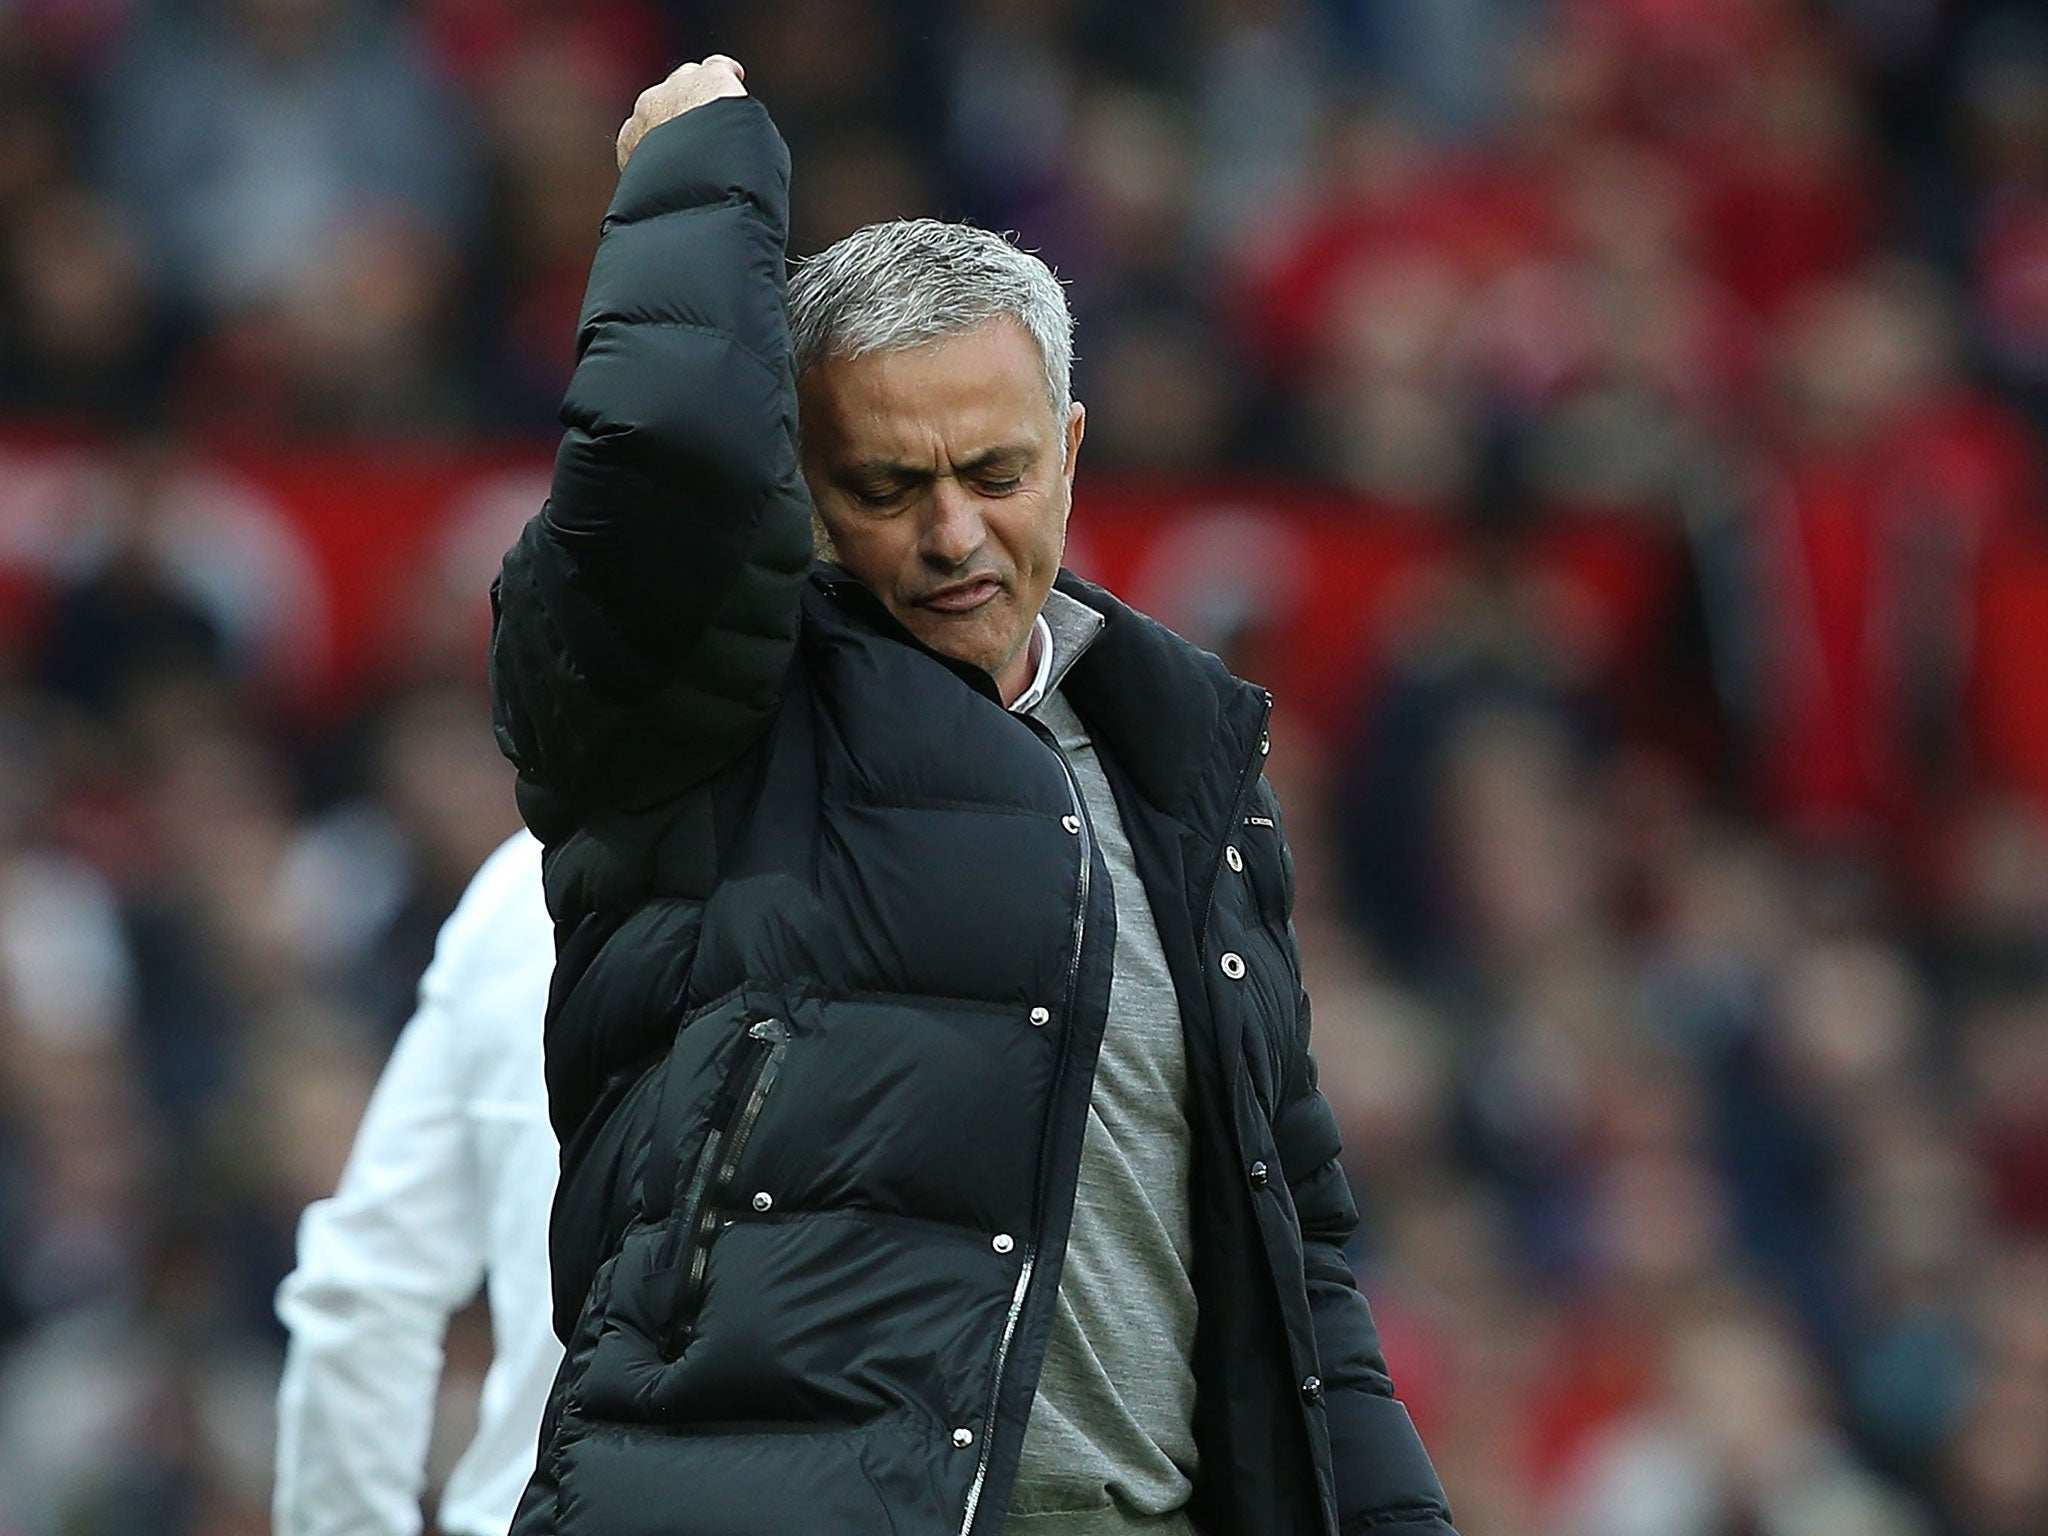 Manchester United have seen the club's debt soar by £51.5m since Jose Mourinho took over